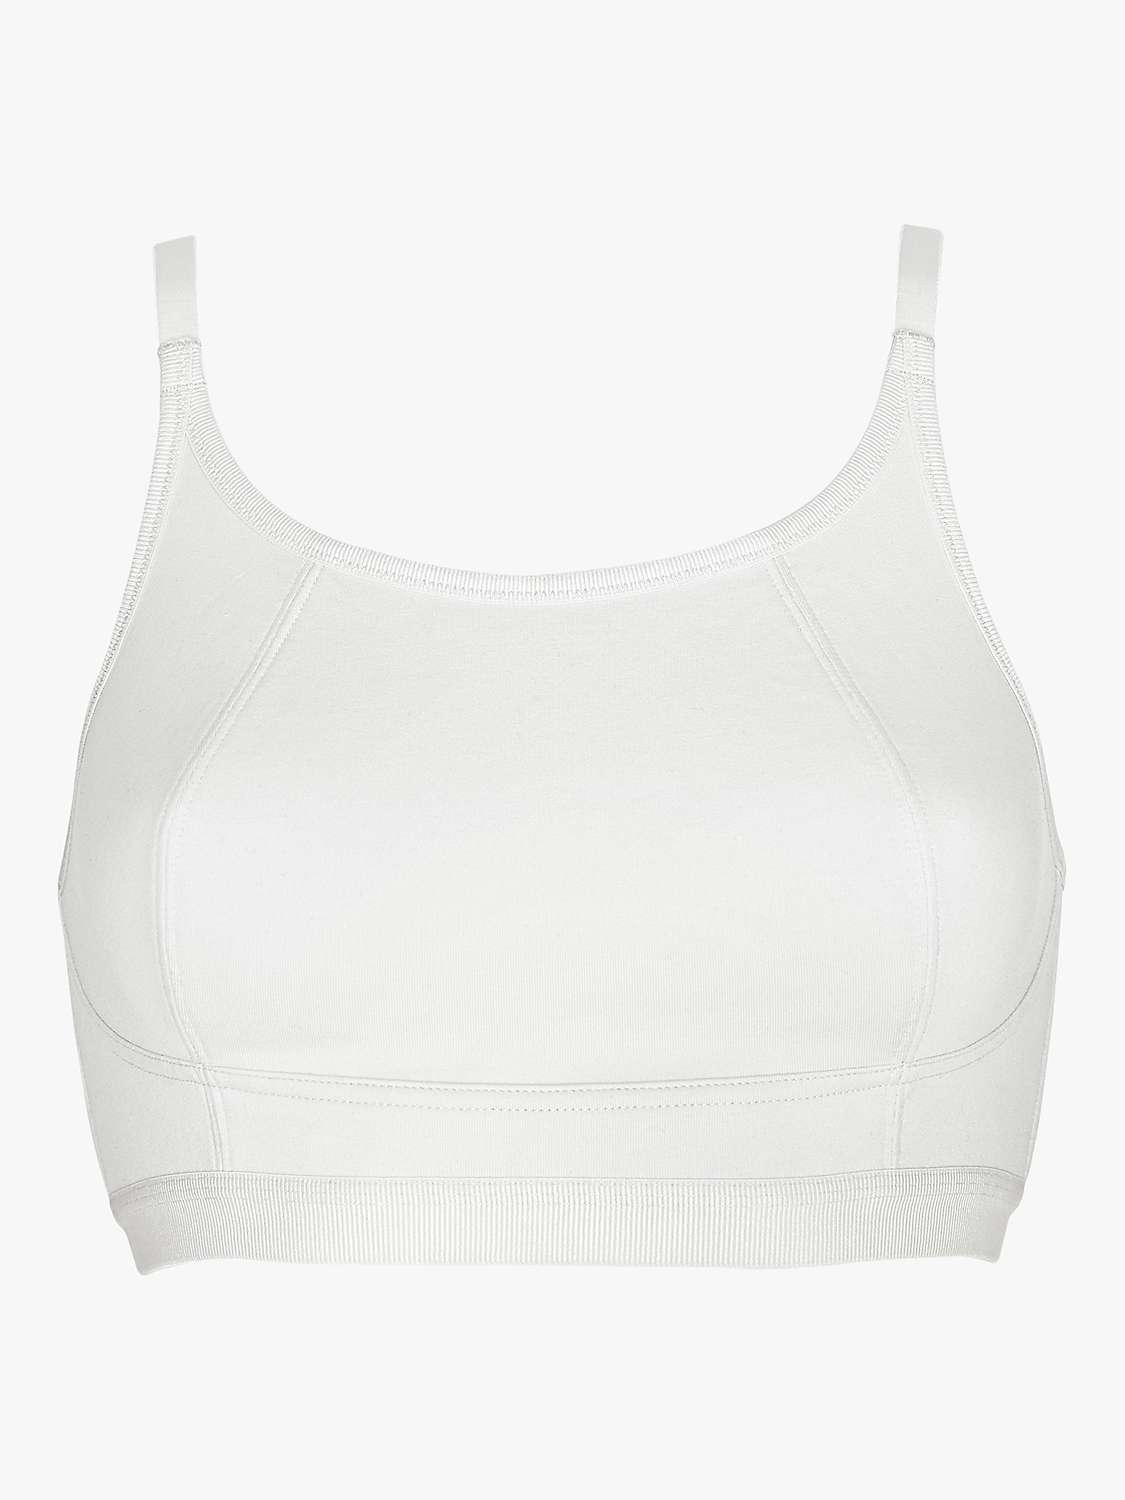 Buy Royce Lola Crop Top Non-Wired Bra, Pack of 2, Peach/White Online at johnlewis.com